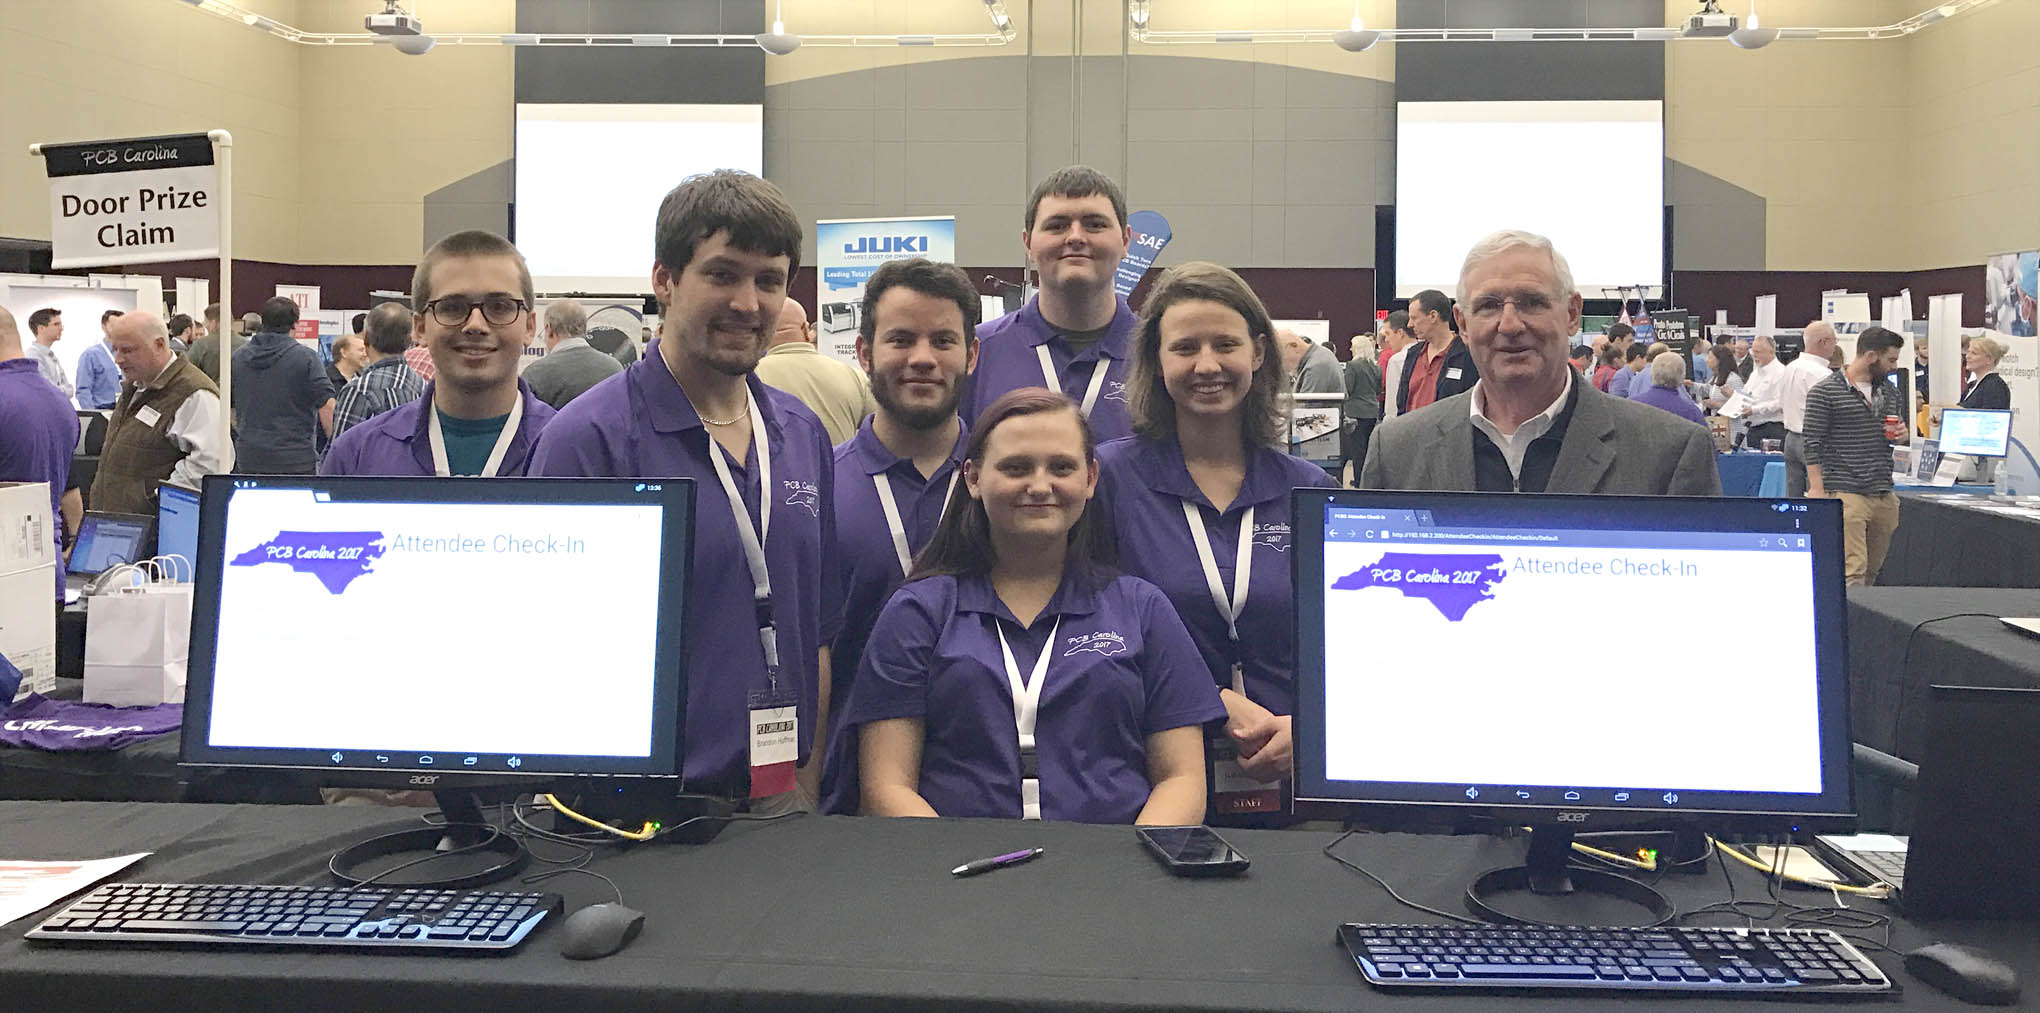 Read the full story, CCCC Laser and Photonics students volunteer for technical conference